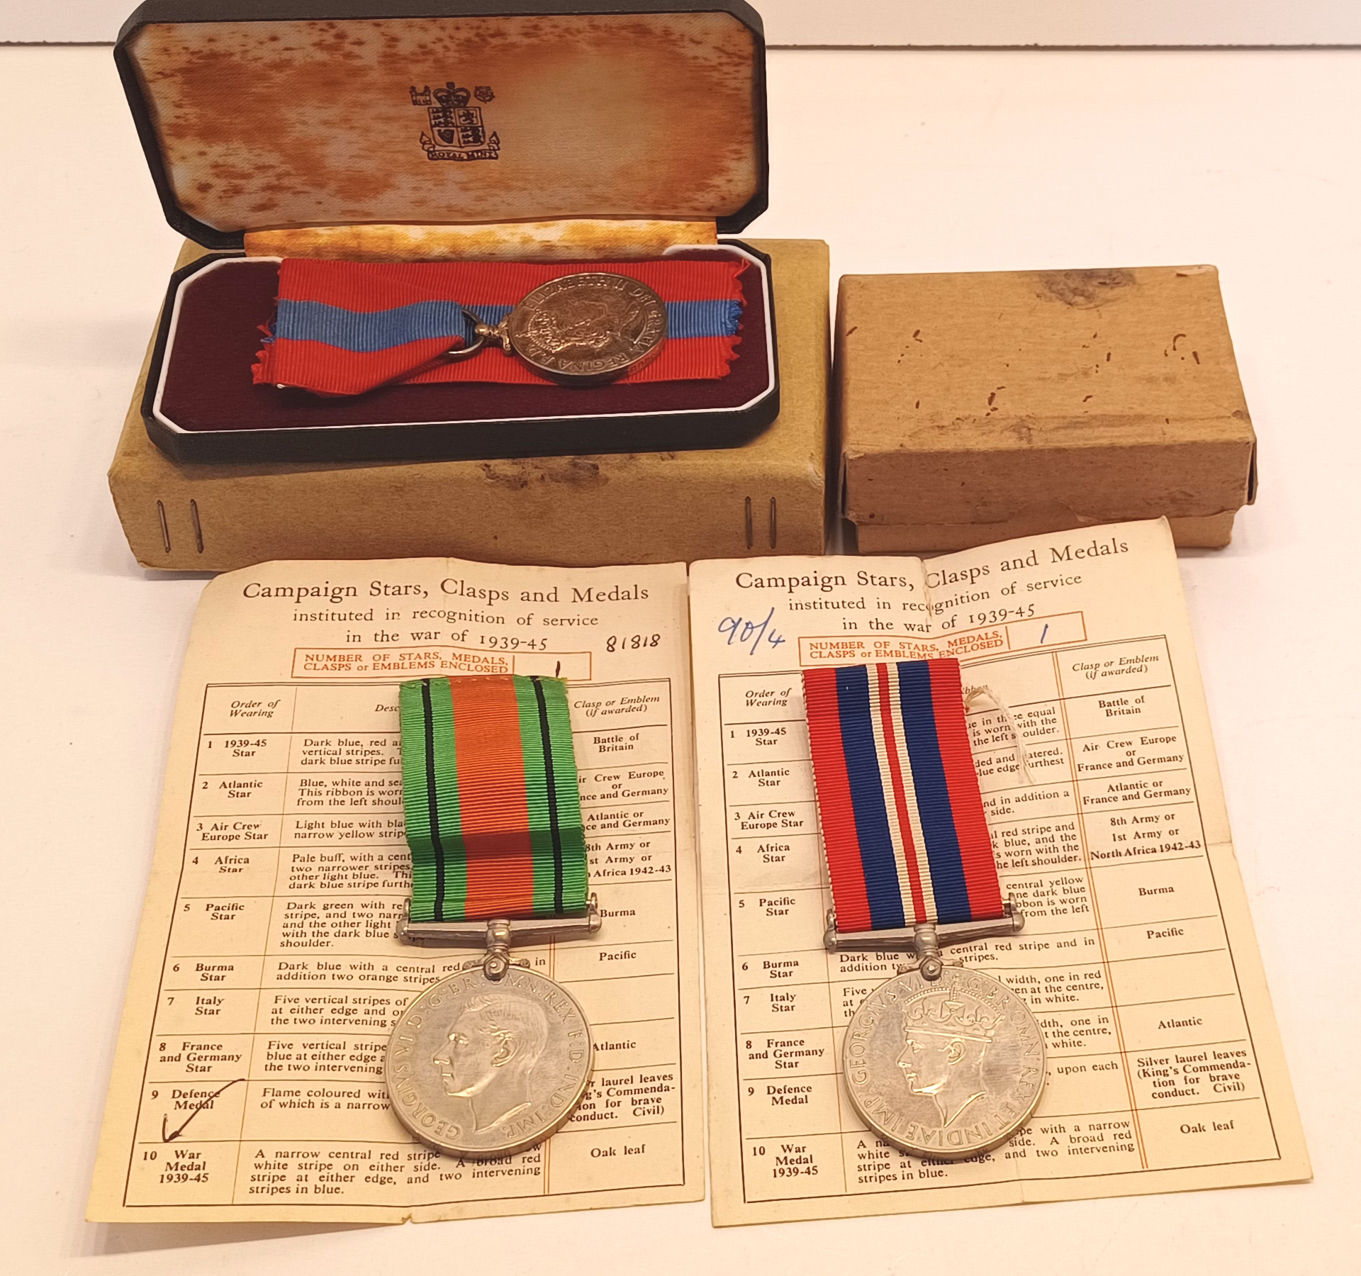 MILITARIA - CASED IMPERIAL SERVICE MEDAL AND 2 WW2 MEDALS 1939 - 1945, DEFENCE MEDALS